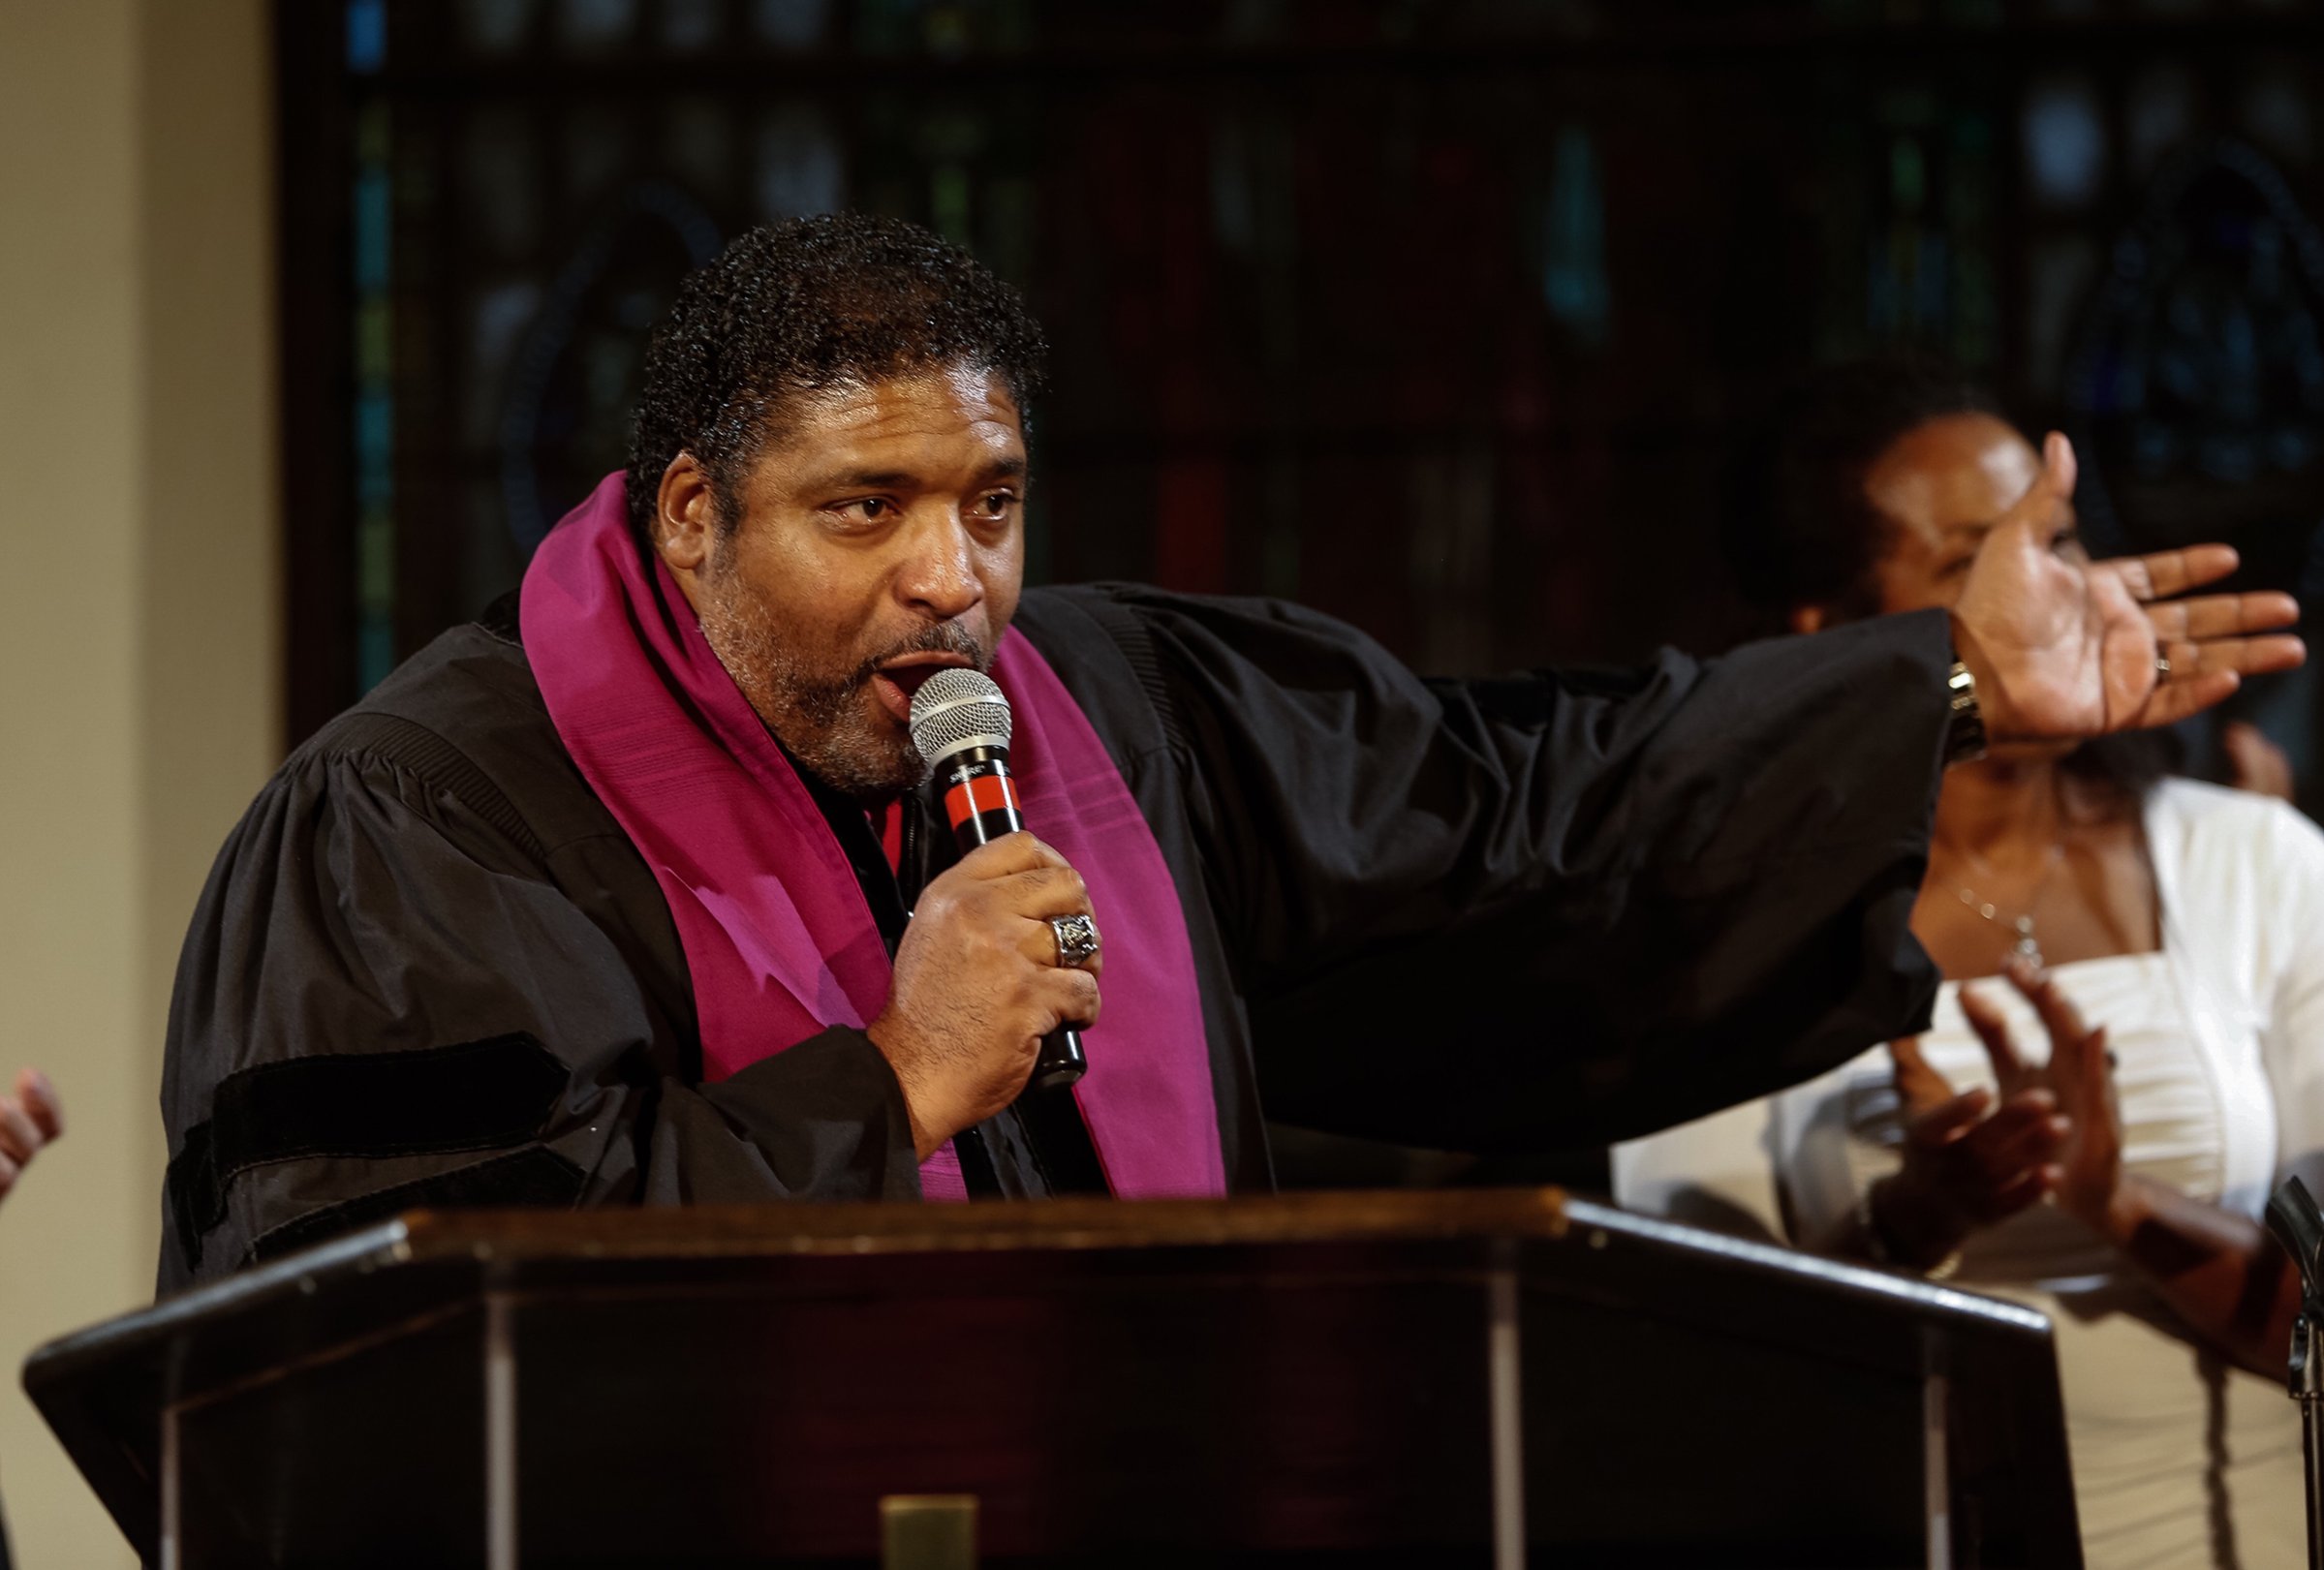 Reverend Dr. William J. Barber II speaks during a revival service to address moral public policies at Bethel AME Church in Boston on Aug. 1, 2016.